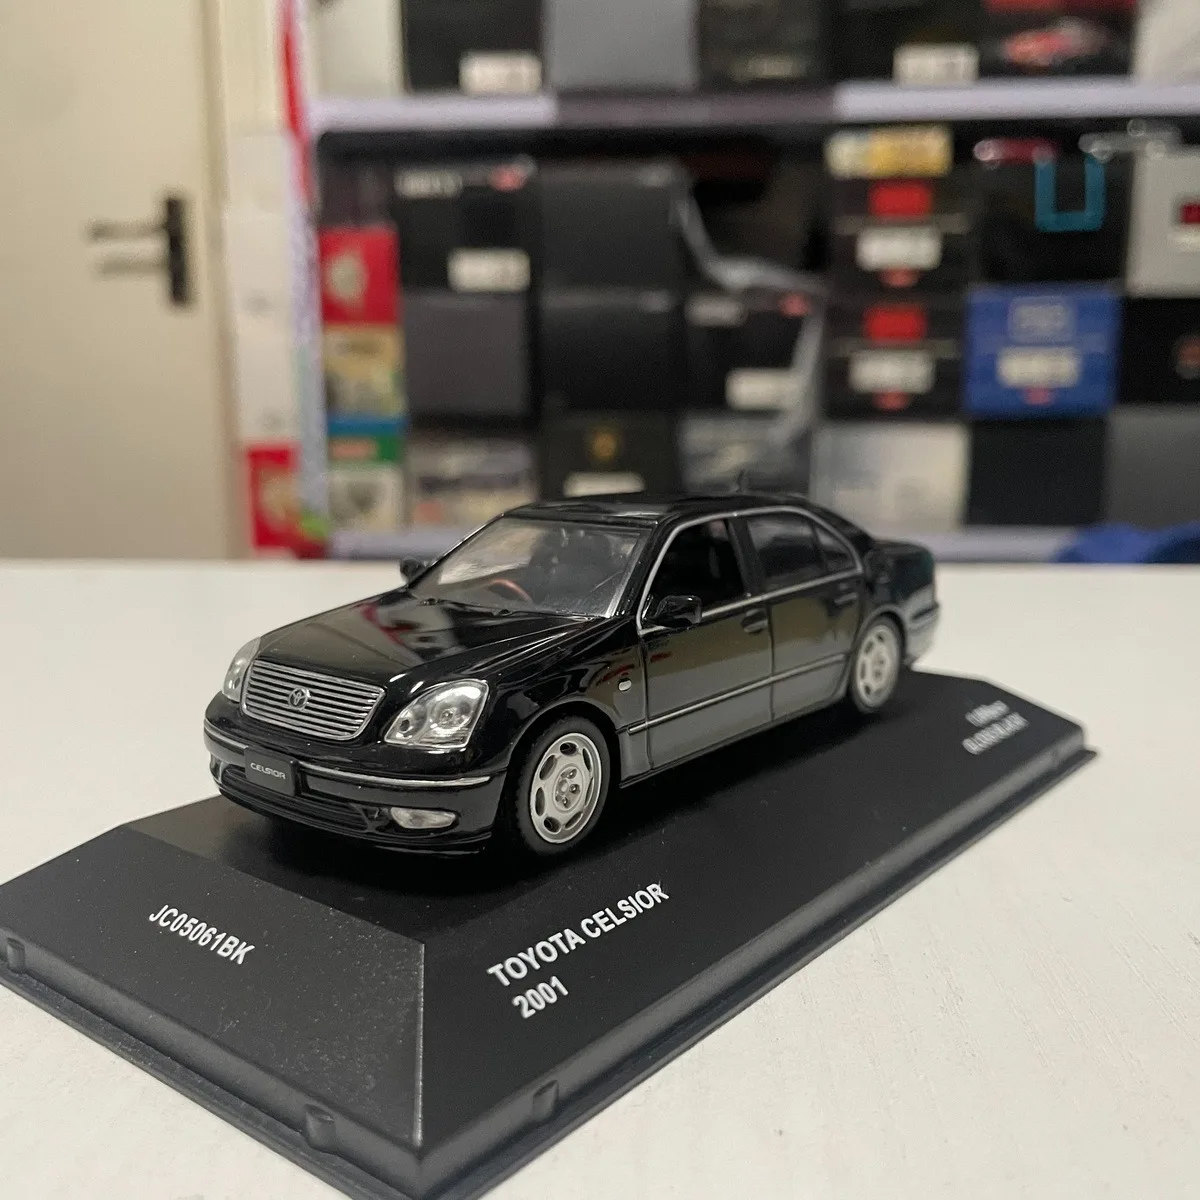 

Diecast 1:43 Scale CELSIOR UCF30 2001 LS430 Alloy Car Model Collection Souvenir Display Ornaments Vehicle Toy